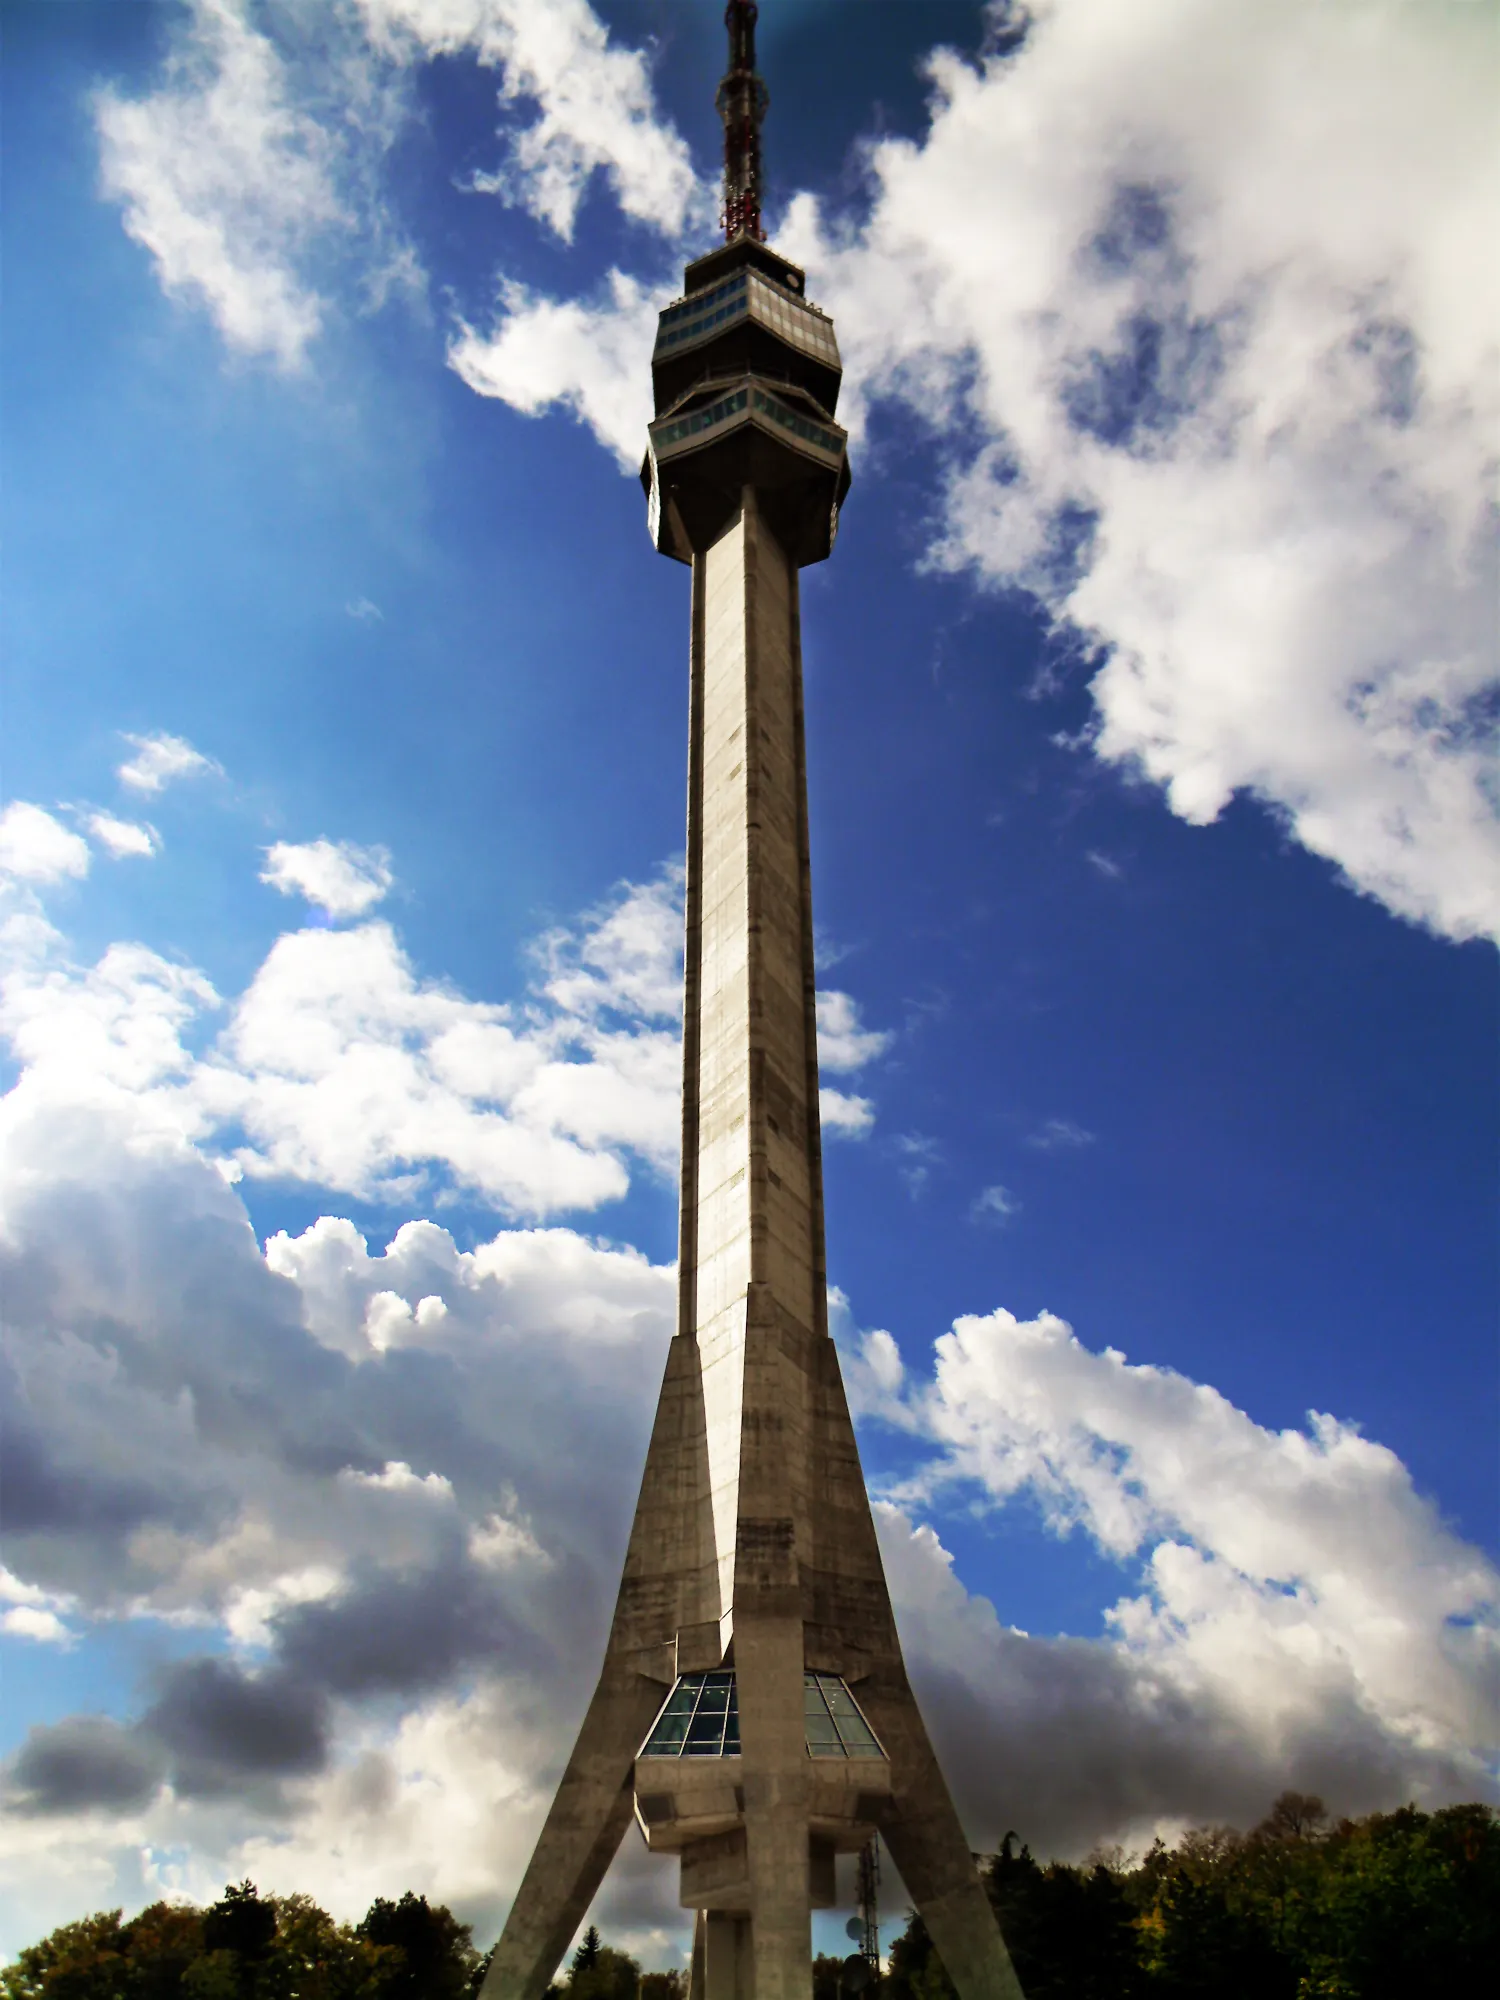 Photo showing: Avala Tower was destroyed on 29 April 1999 by NATO bombardment, supposedly to put Radio Television of Serbia off the air. Radio Television Serbia broadcasting did not suffer as it was relying on a network of local TV stations which were obliged to relay its program throughout the whole of Serbia. The tower was one of the last buildings to be destroyed before the end of the NATO operation. A special bomb was used to destroy the tower. The blast was one of the loudest explosions heard throughout Belgrade during the NATO bombardment. Between the date of its destruction and 11 September 2001, it was the tallest building ever destroyed, succeeding the Singer Building. As of 2001, it is the third tallest building ever destroyed (behind the two towers of the World Trade Centre in new York).
In 2004, Radio Television Serbia commenced a series of fund-raising events in order to collect money to construct the building once again at the same place it was destroyed. In 2005, clearing of the site where the tower was destroyed began and on 21 December 2006 the construction of a new Avala Tower commenced.
Initially, completion of the new tower was expected in August 2008, but construction works were severely delayed. The opening date was pushed back to 29 April, the tenth anniversary of its destruction. Radio Television Serbia reported on 23 October 2009 that the tower has been completed.

Source: Avala Tower on Wikipedia